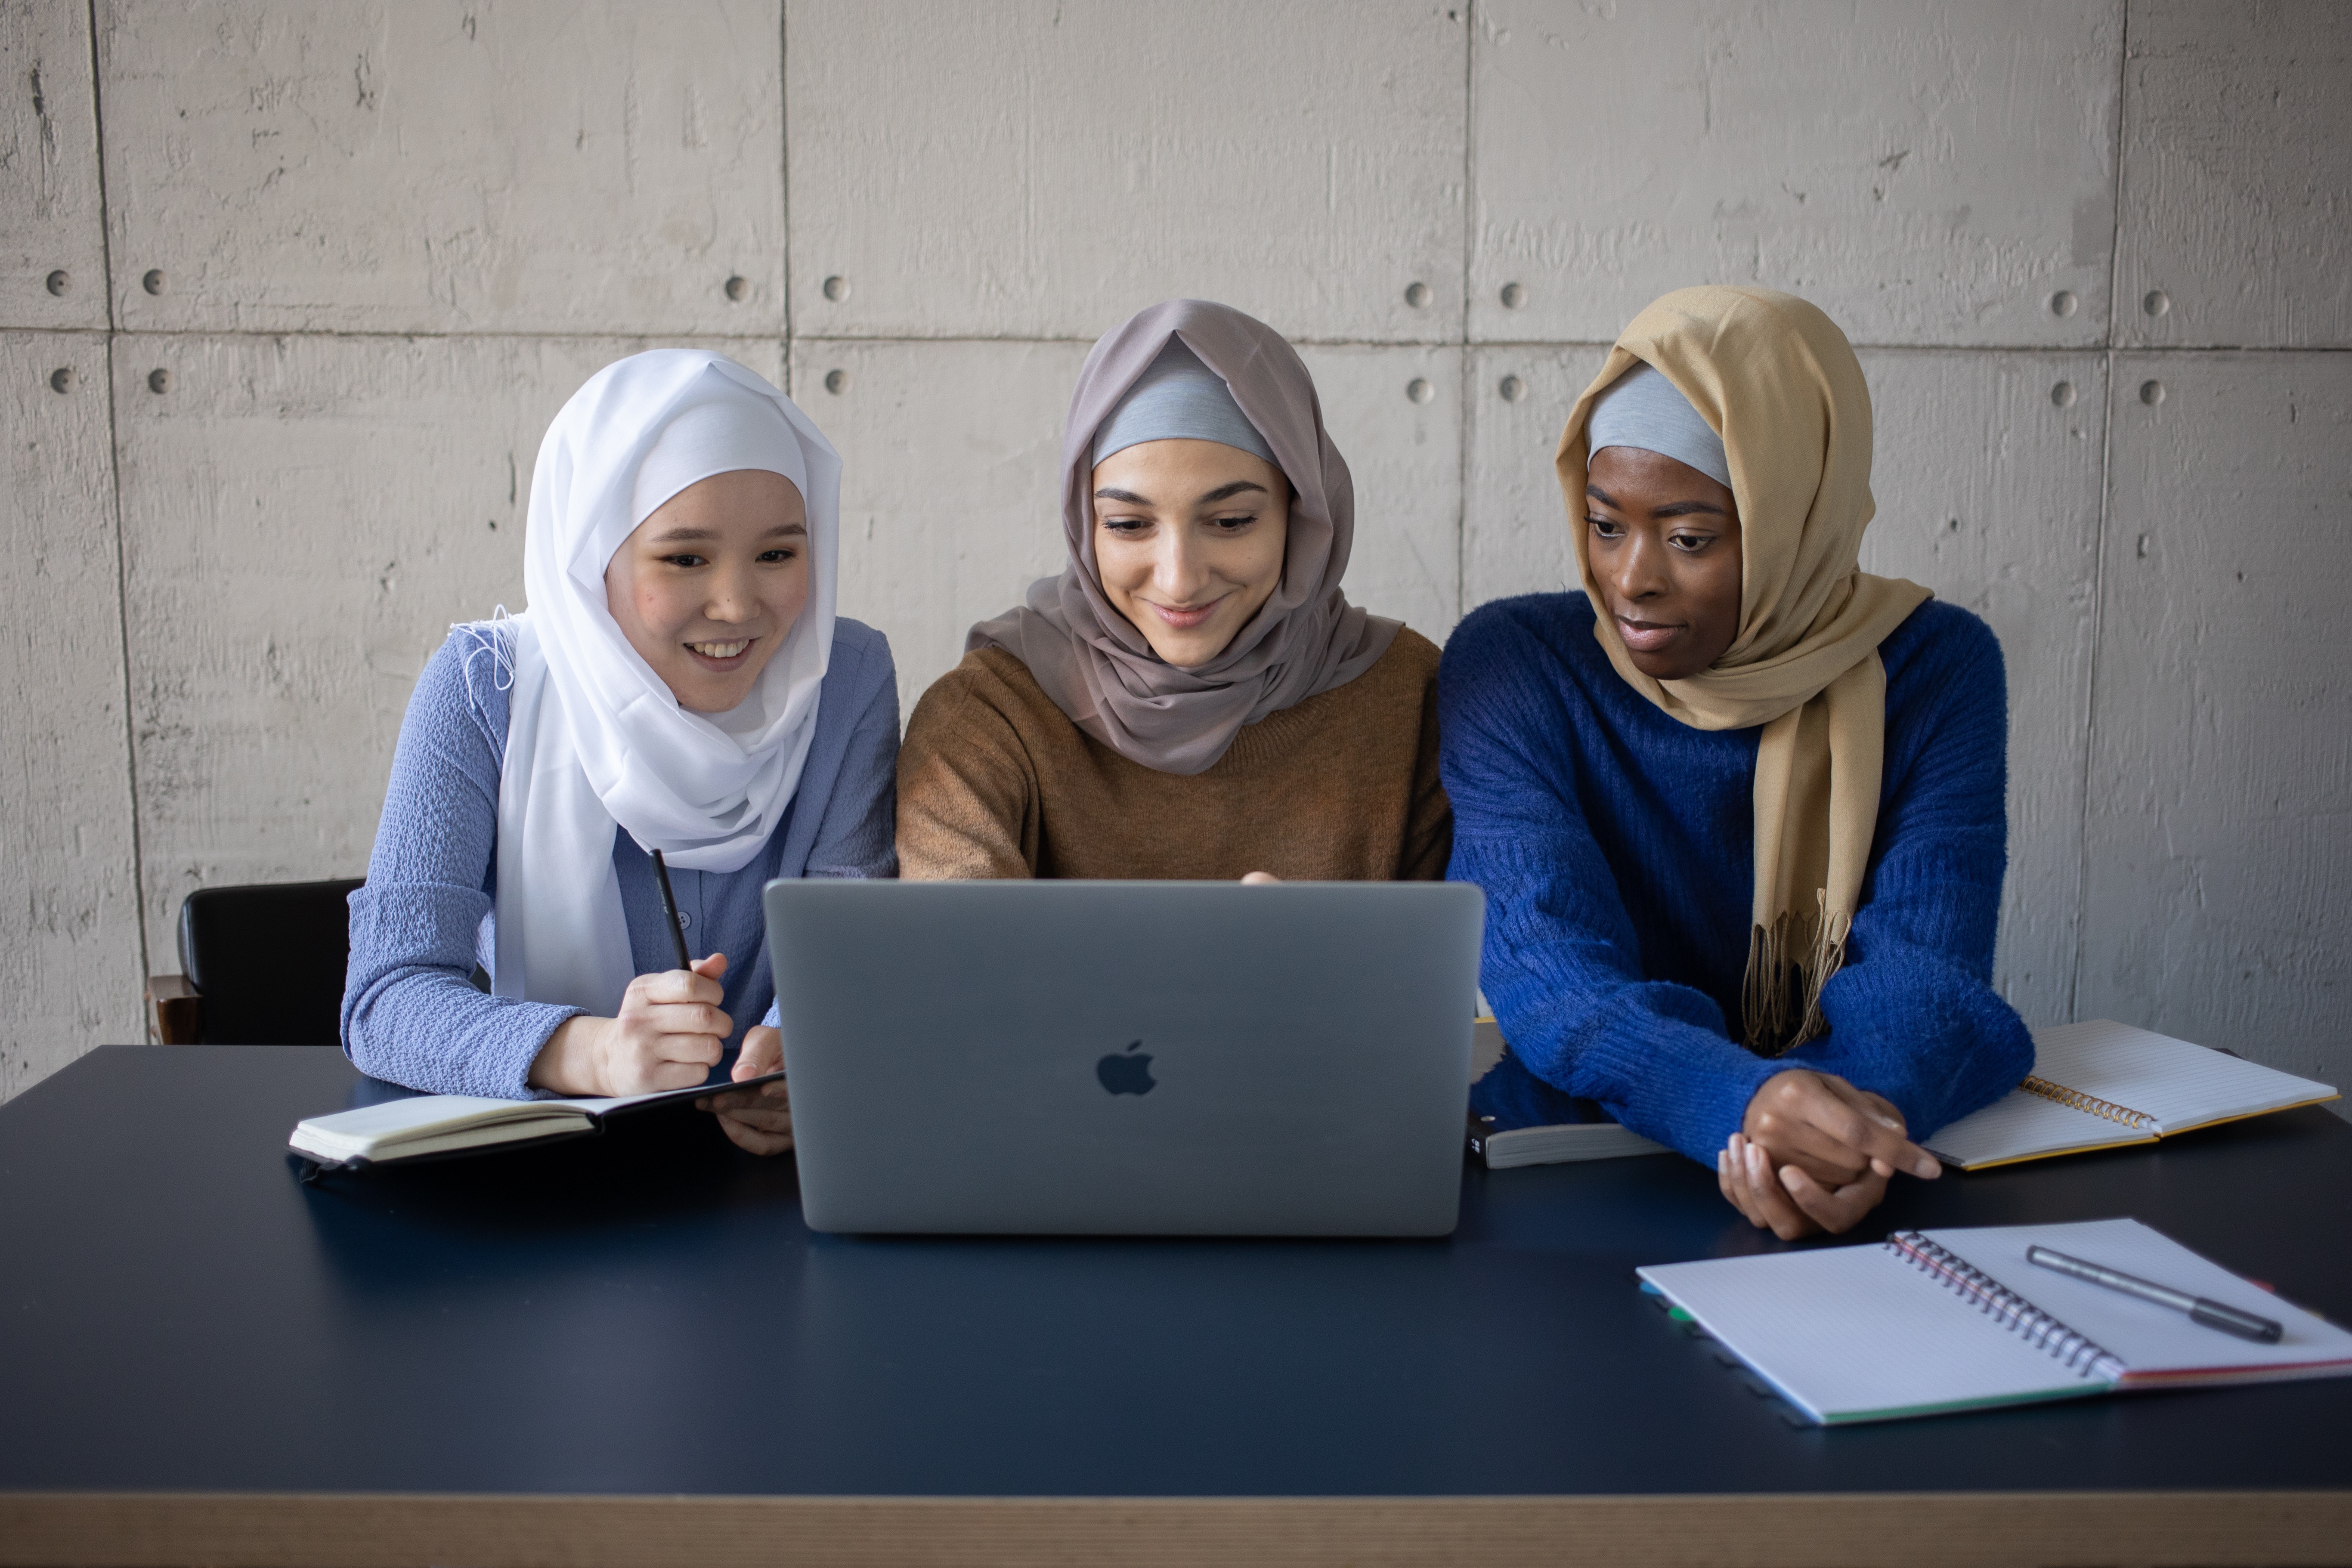 Three individuals wearing hijab sit in front of a laptop.